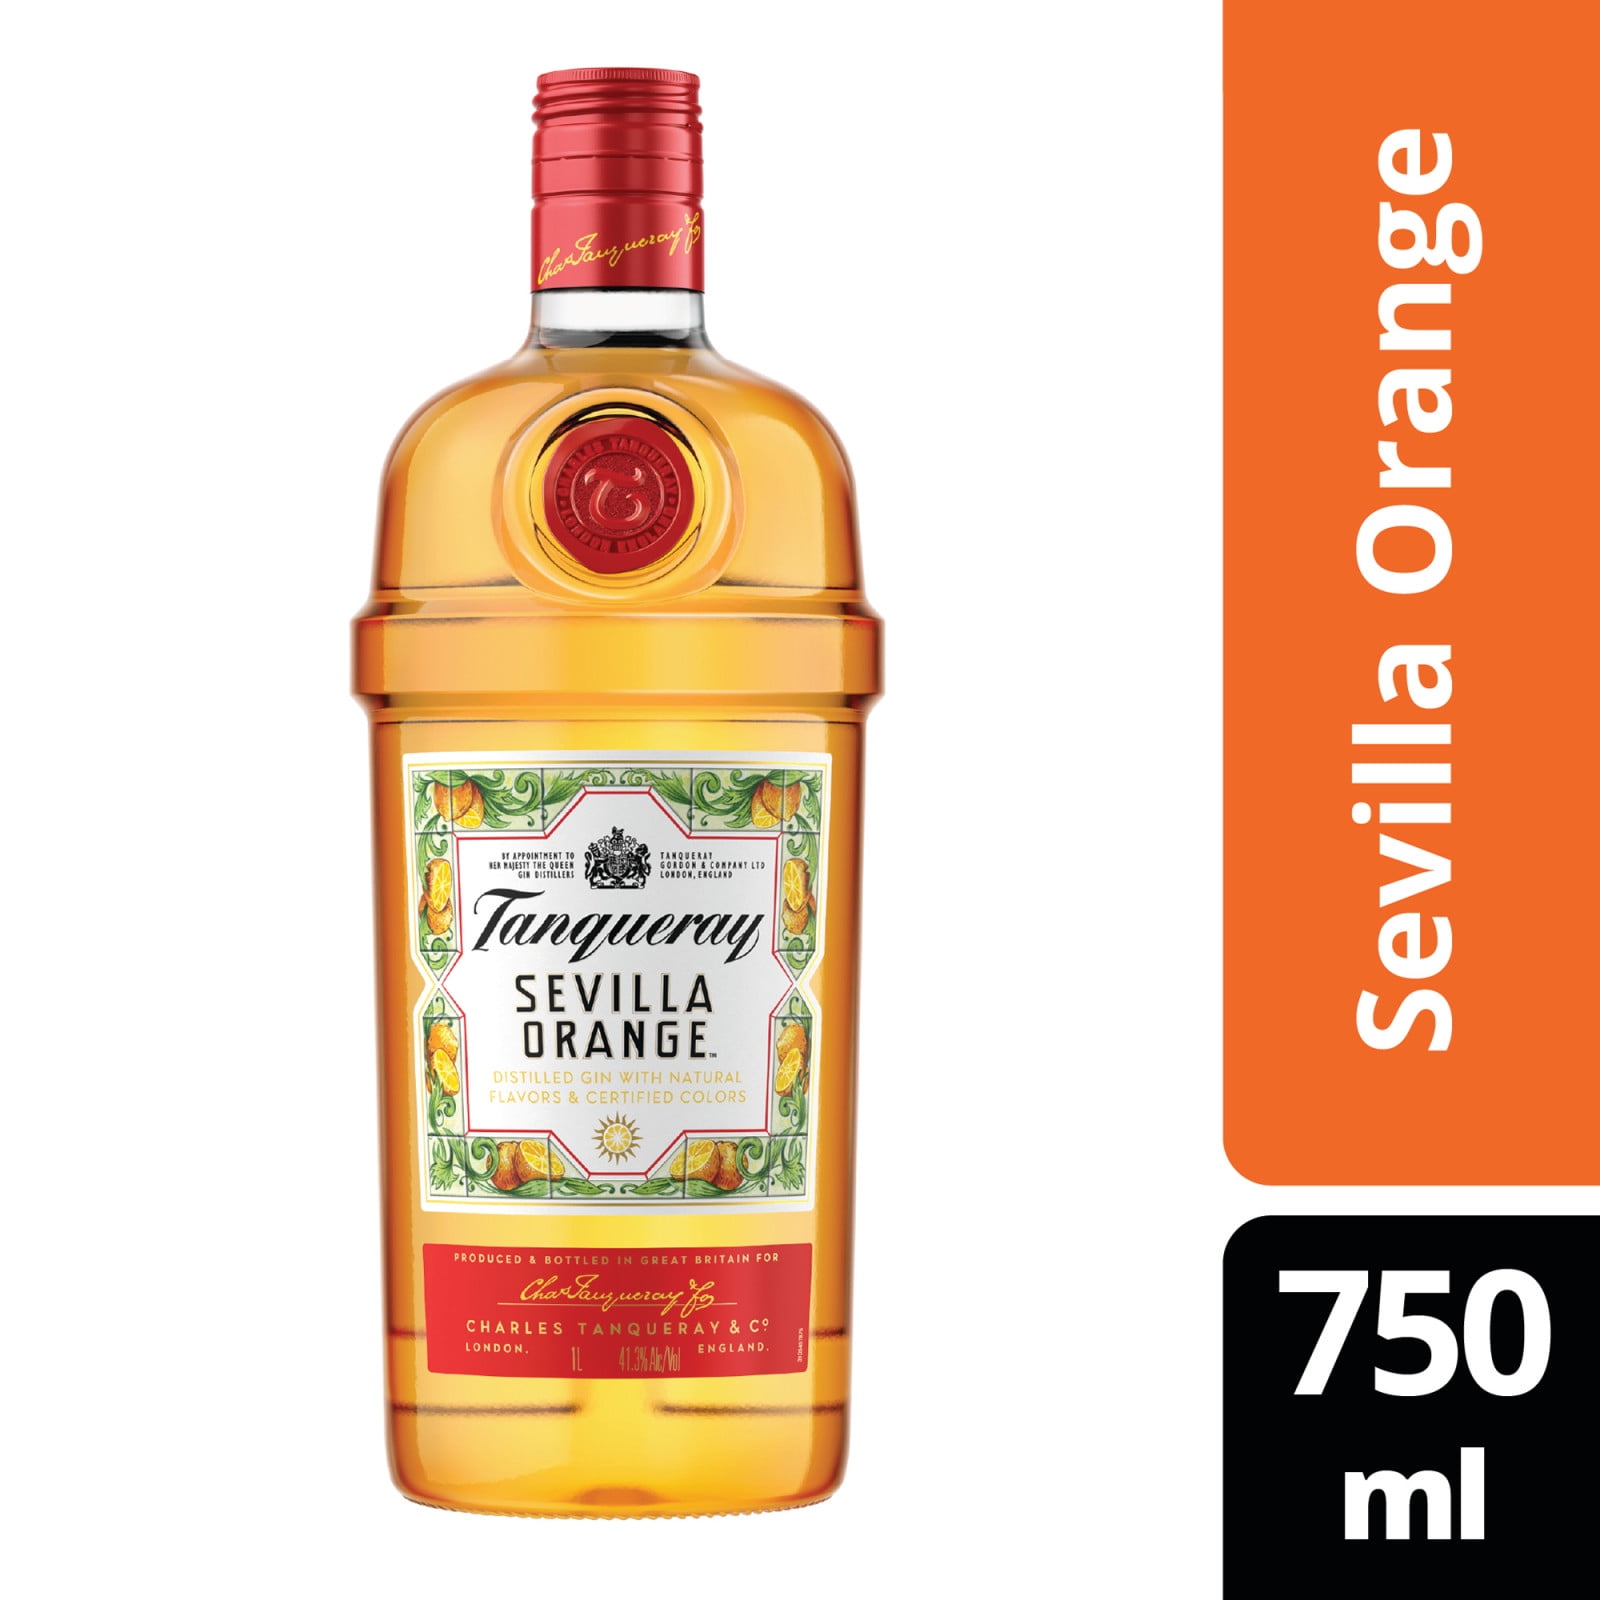 Certified and Tanqueray Colors) Natural 750 ml, with Flavors 41% Orange Gin (Distilled ABV Sevilla